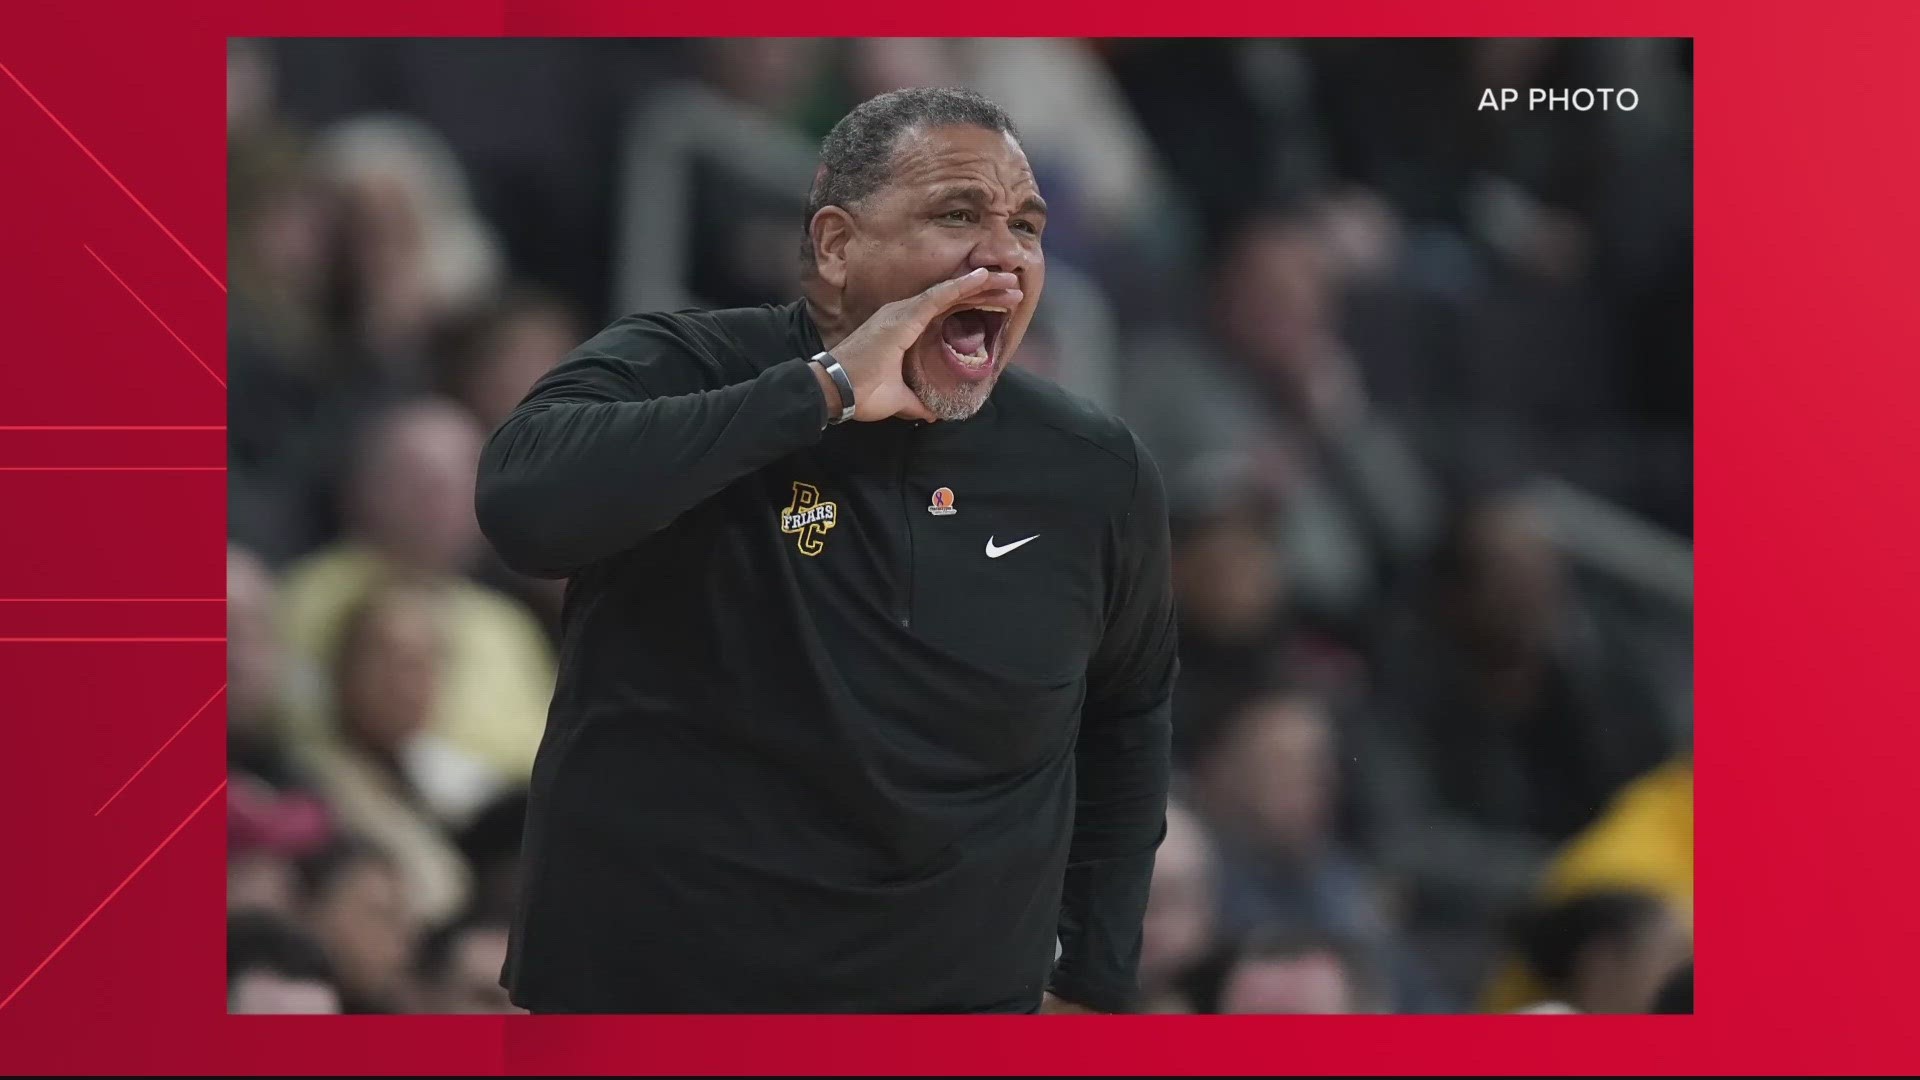 Ed Cooley will be replacing former head coach Patrick Ewing.